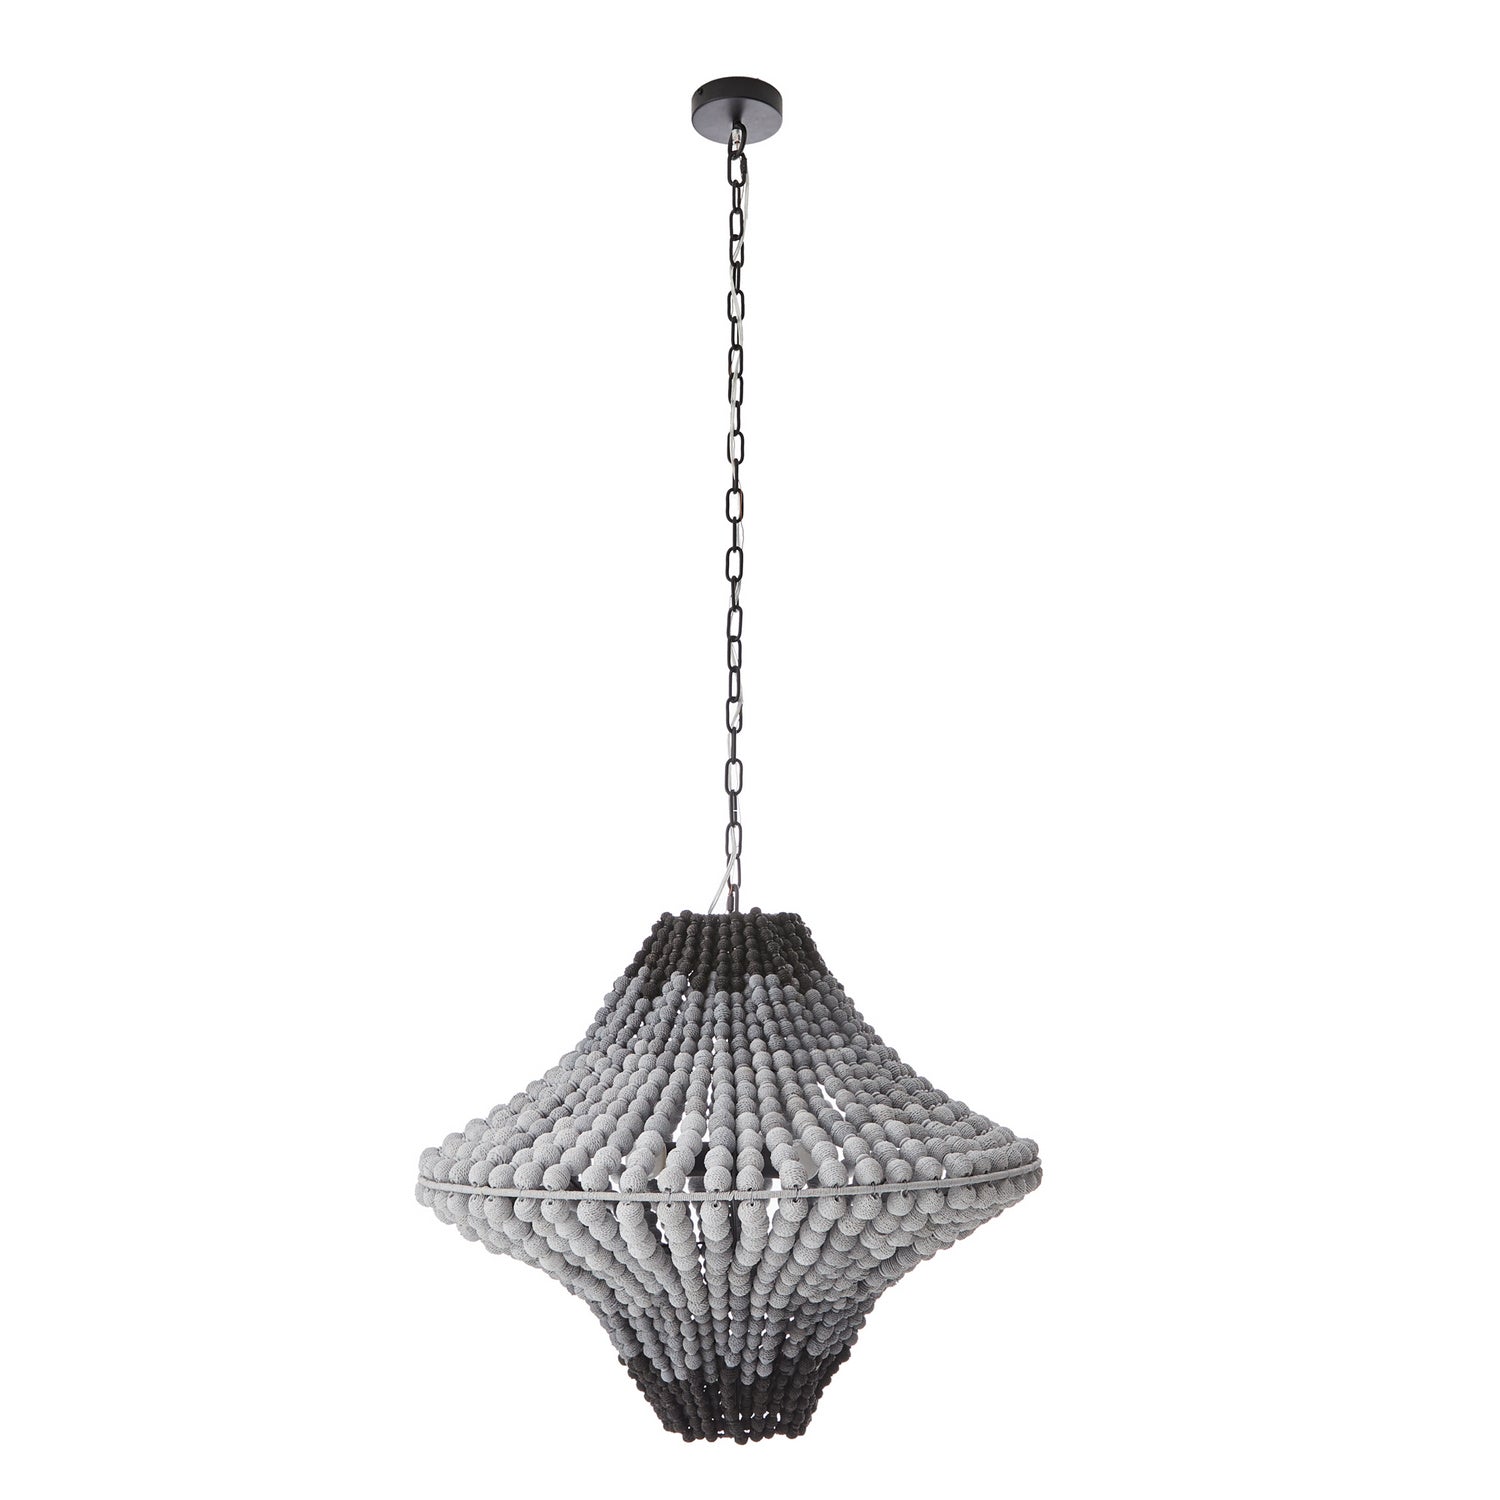 Three Light Chandelier from the Paradisa collection in Black and Gray Ombre finish